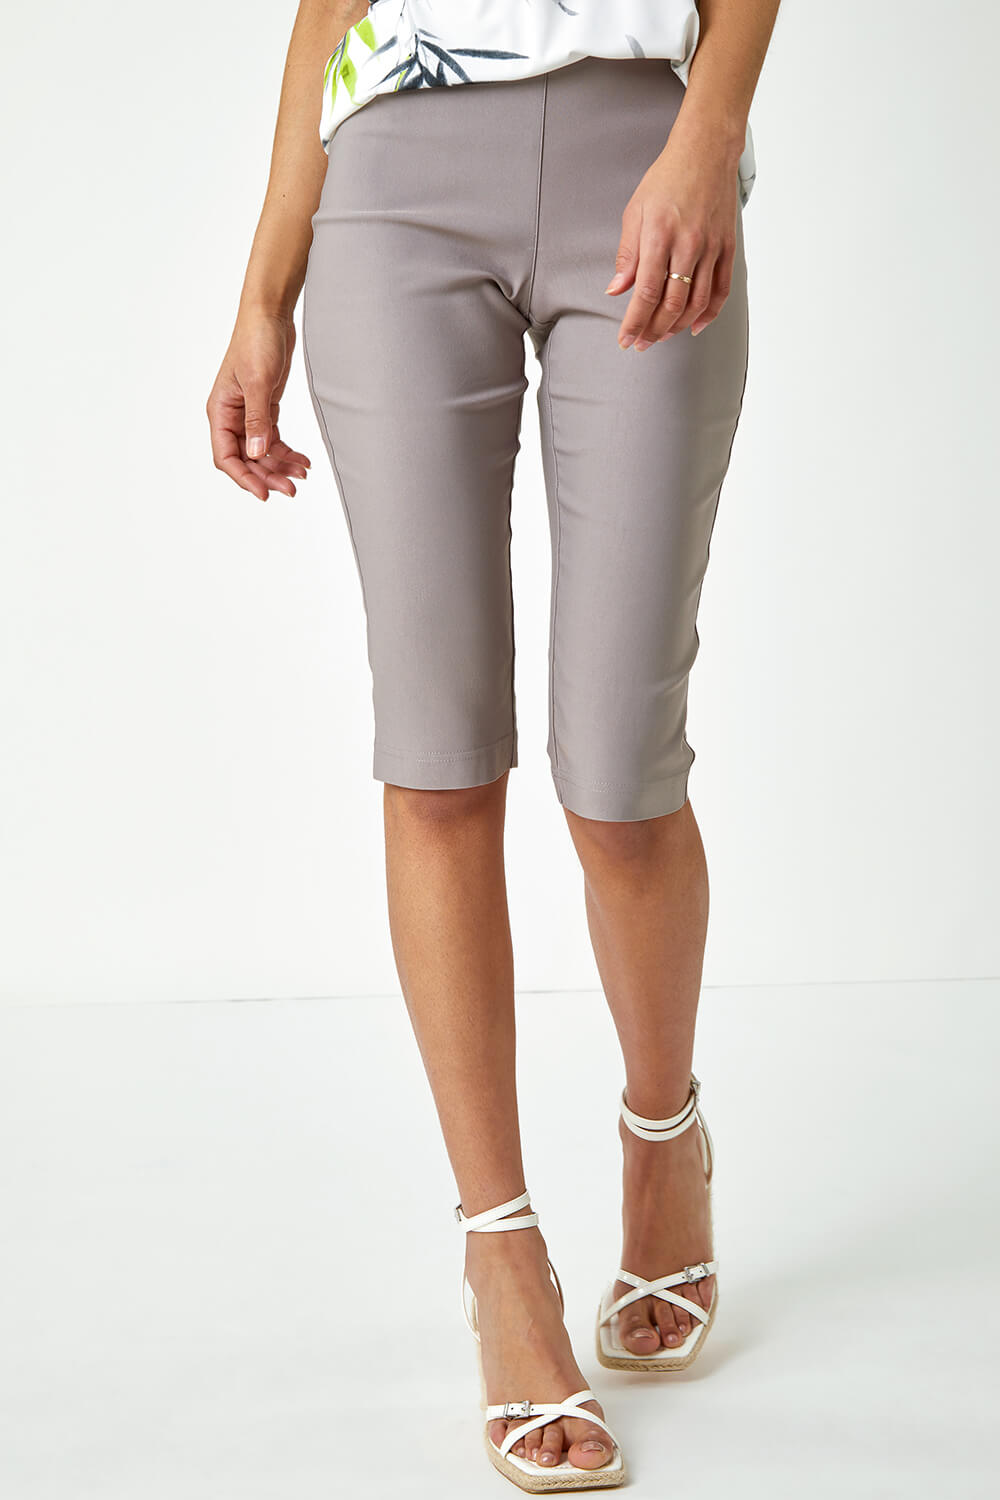 Taupe Knee Length Stretch Shorts, Image 4 of 5